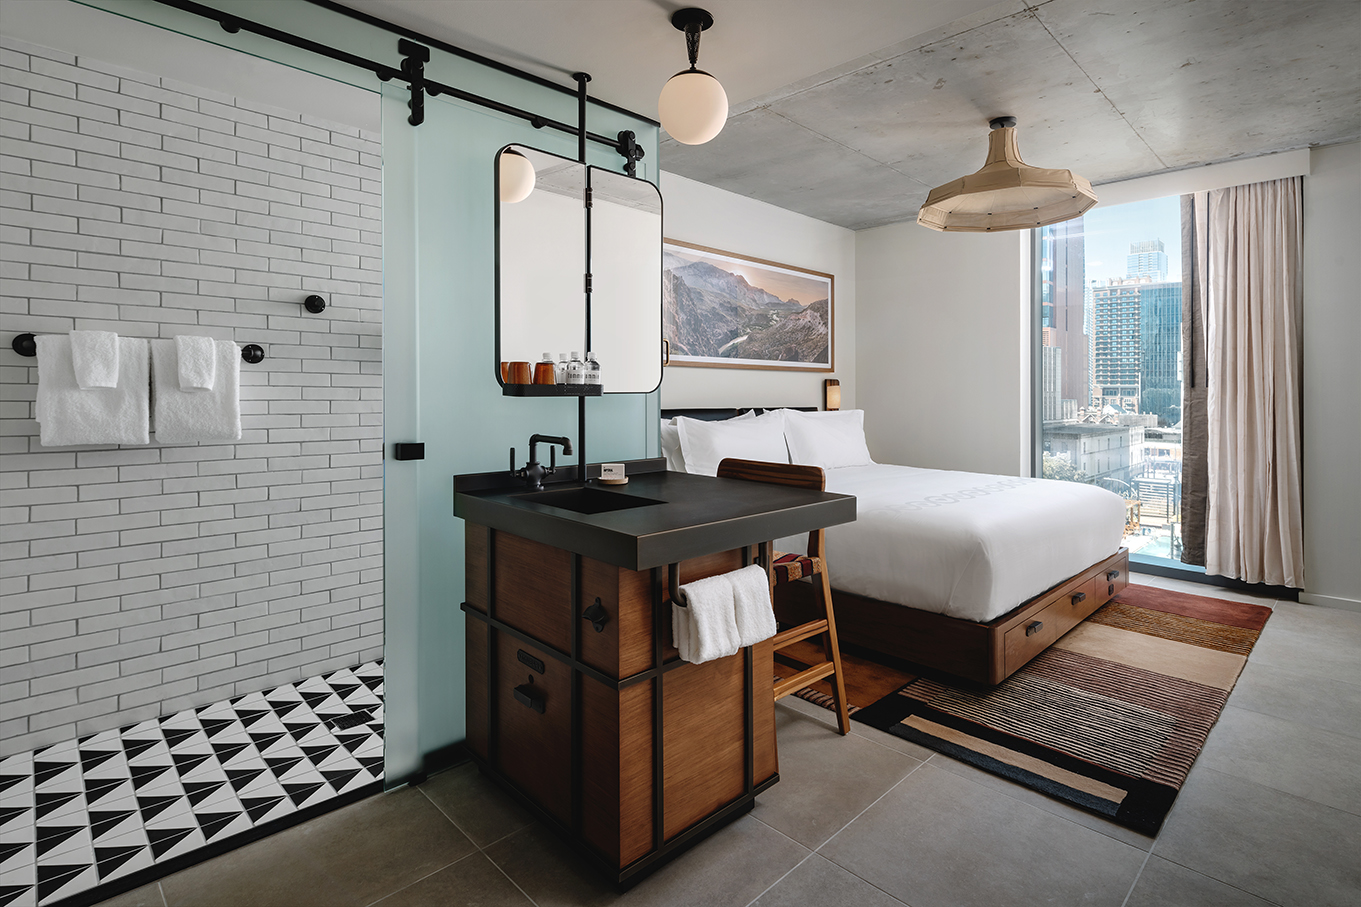 The new Tommie Austin offers 193 guestrooms that are targeted at younger travelers